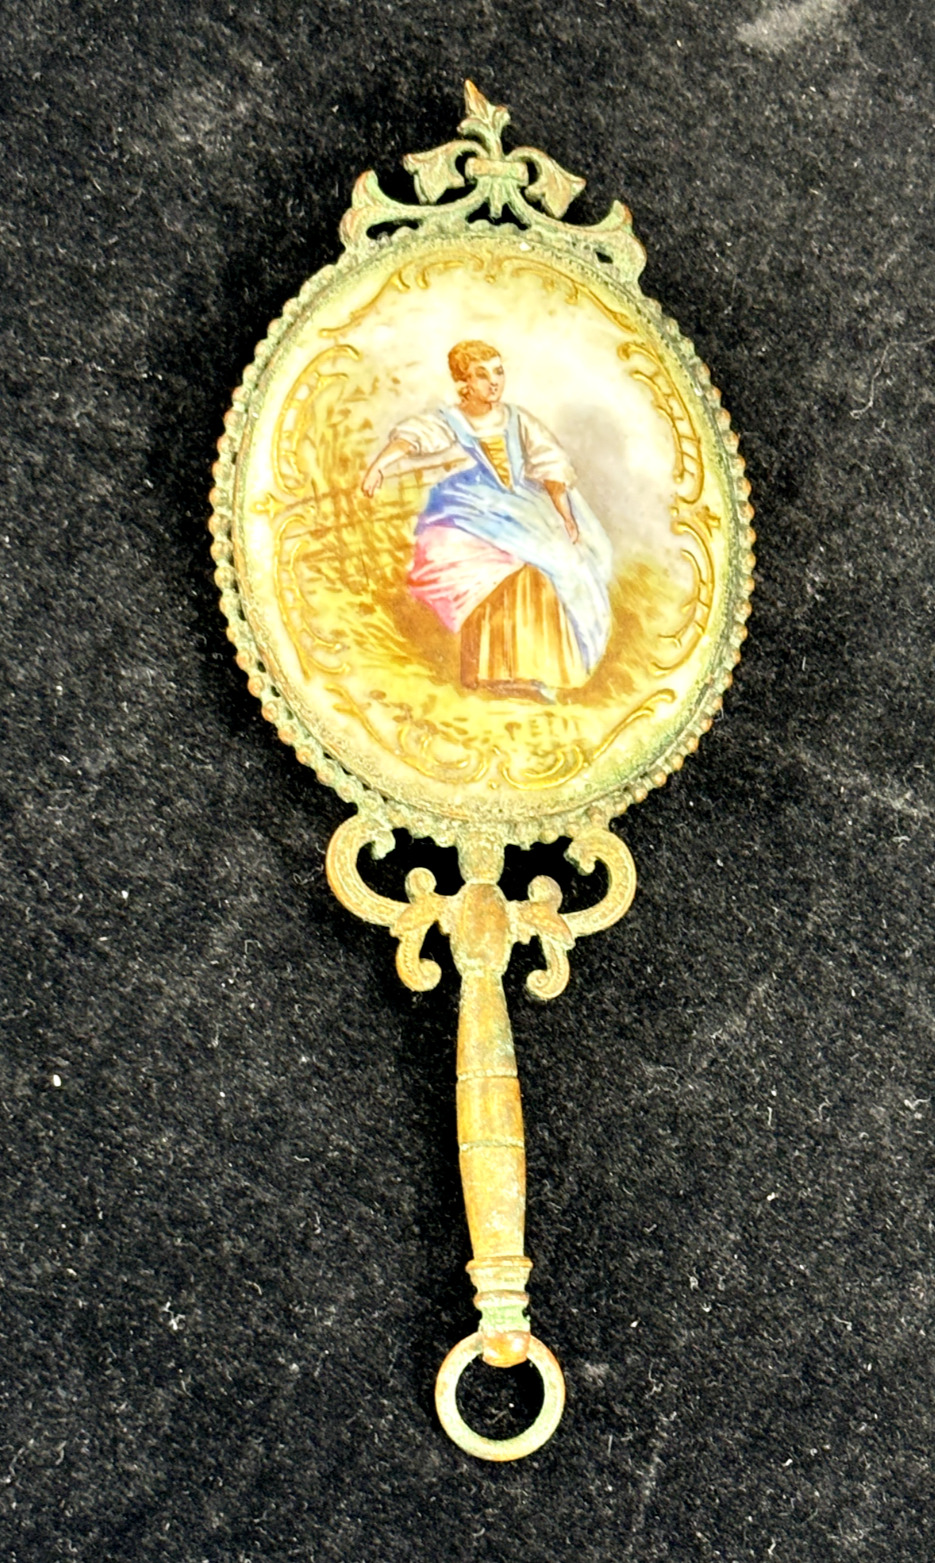 Antique Miniature Hand Mirror - Hand Painted Porcelain Beveled Mirror Chatelaine